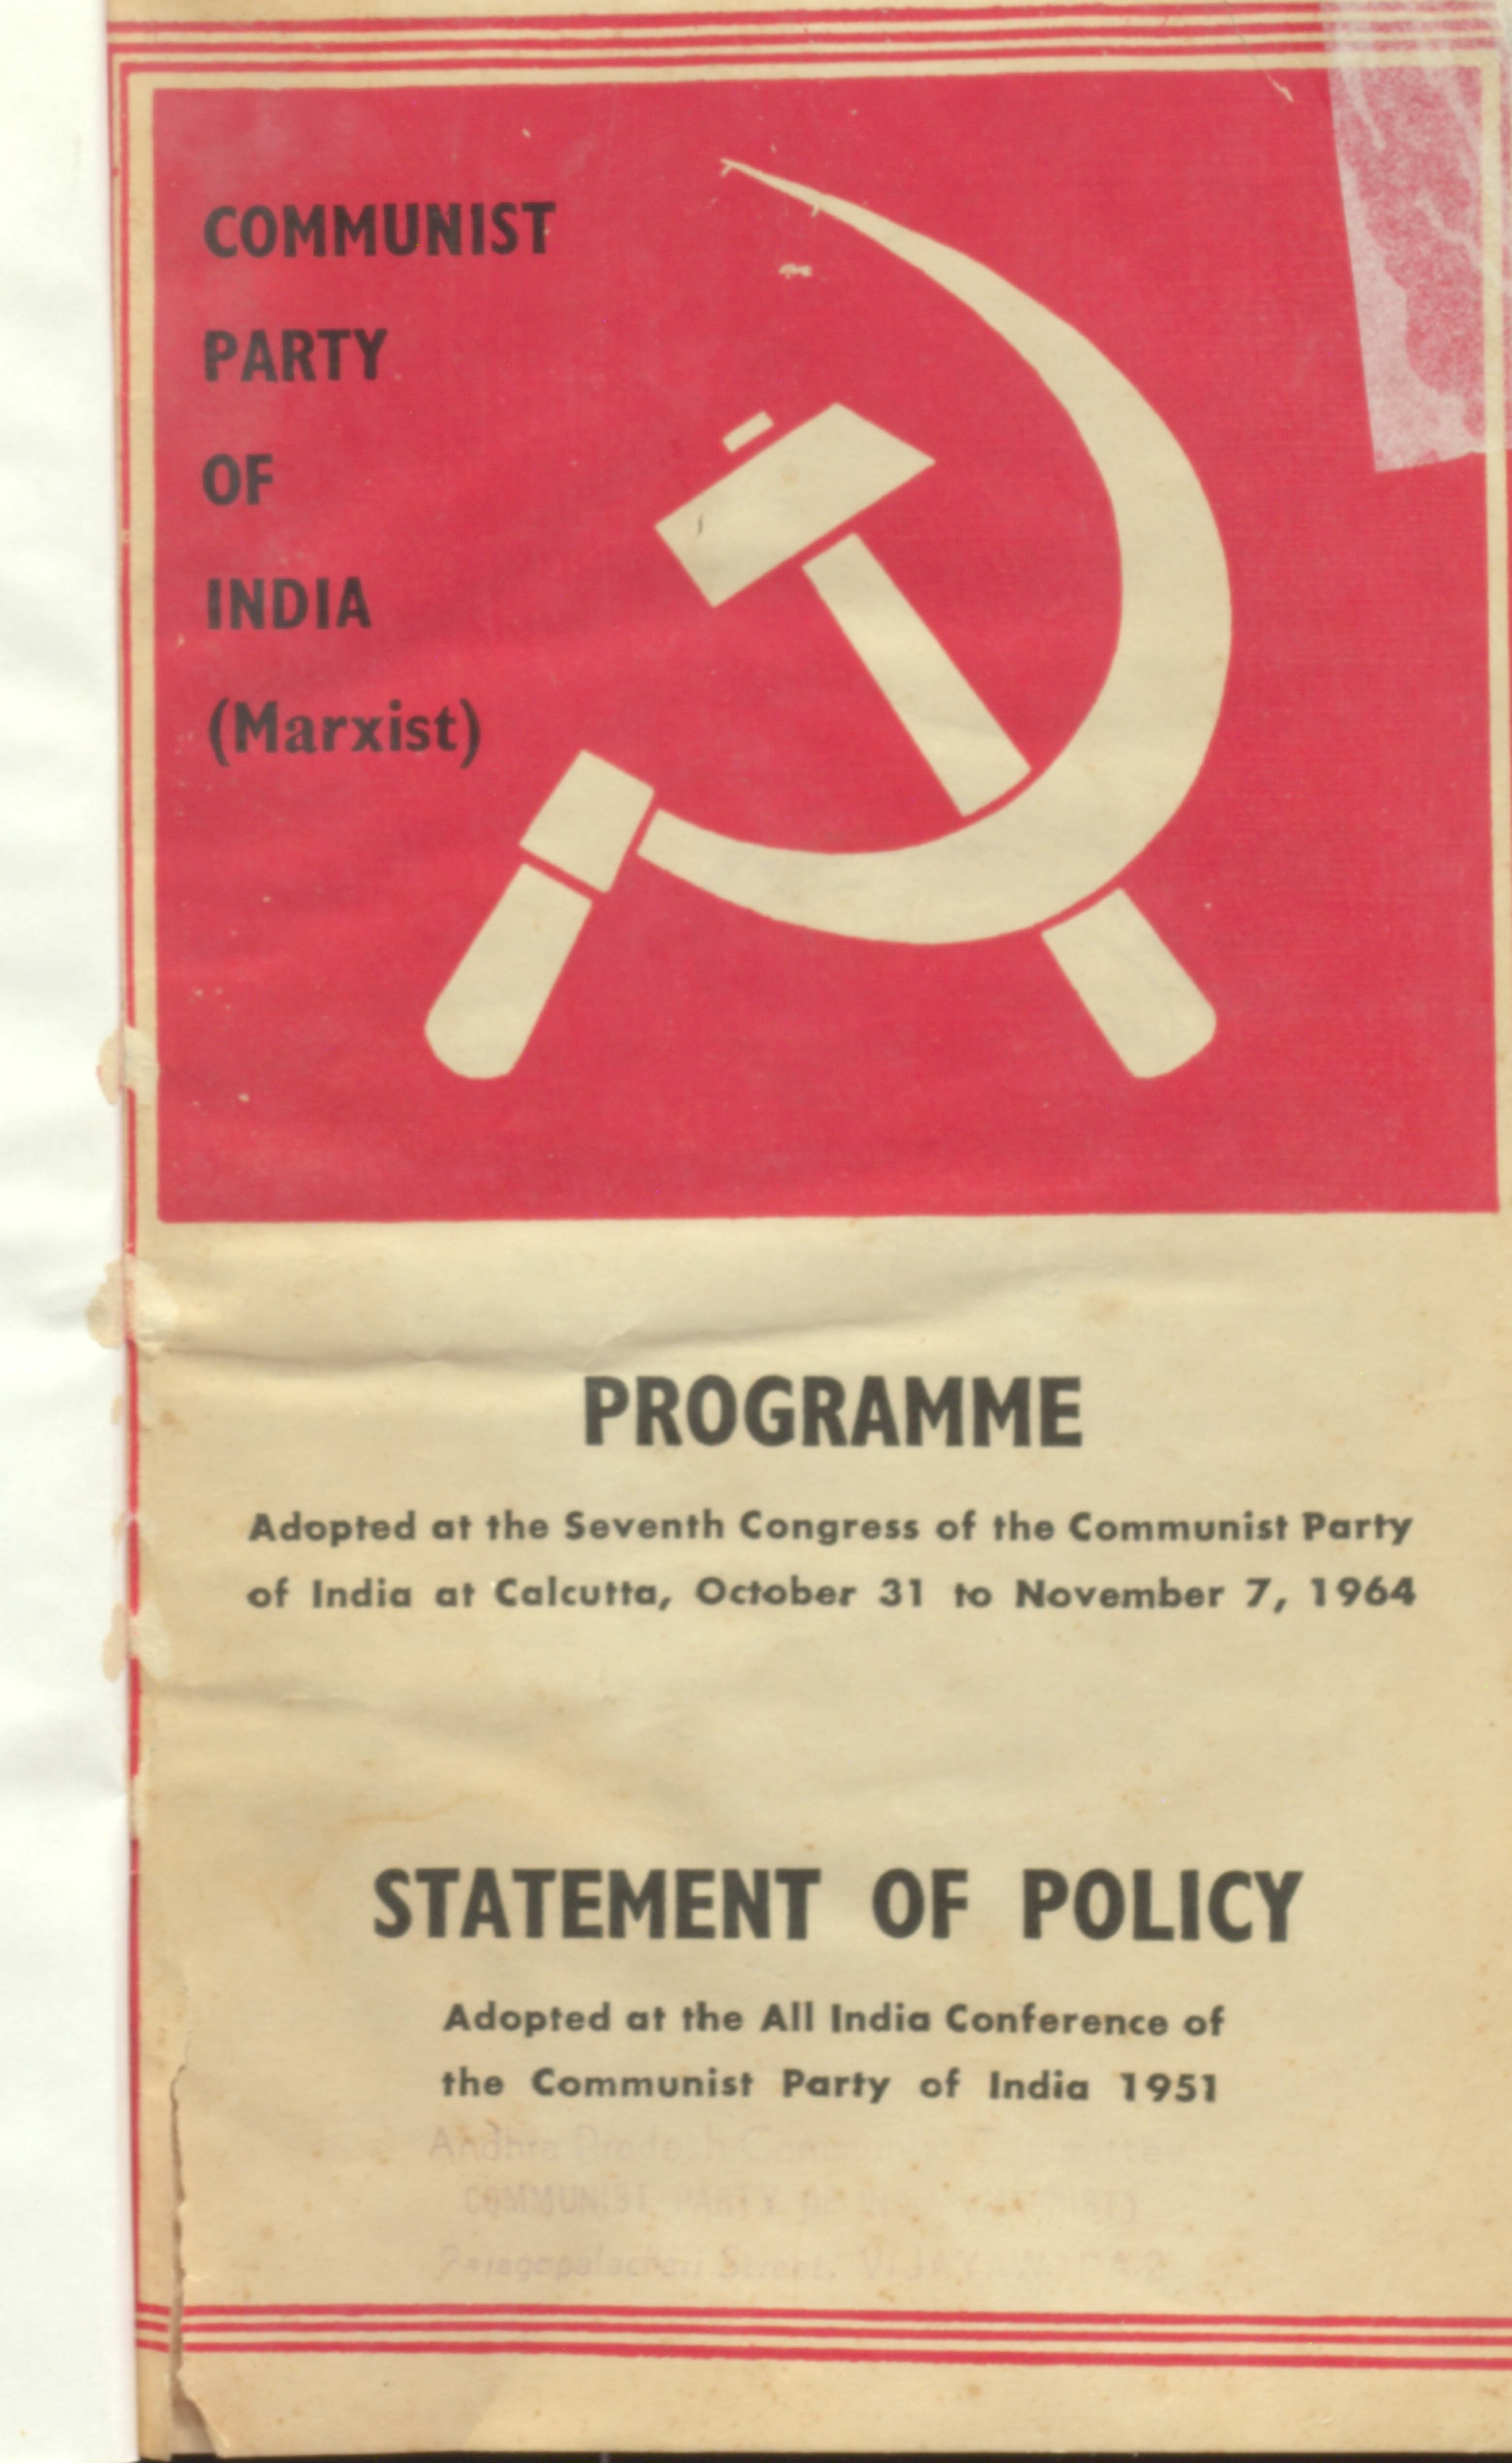 Programme (october 31 to noveber 7, 1964) statement of policy